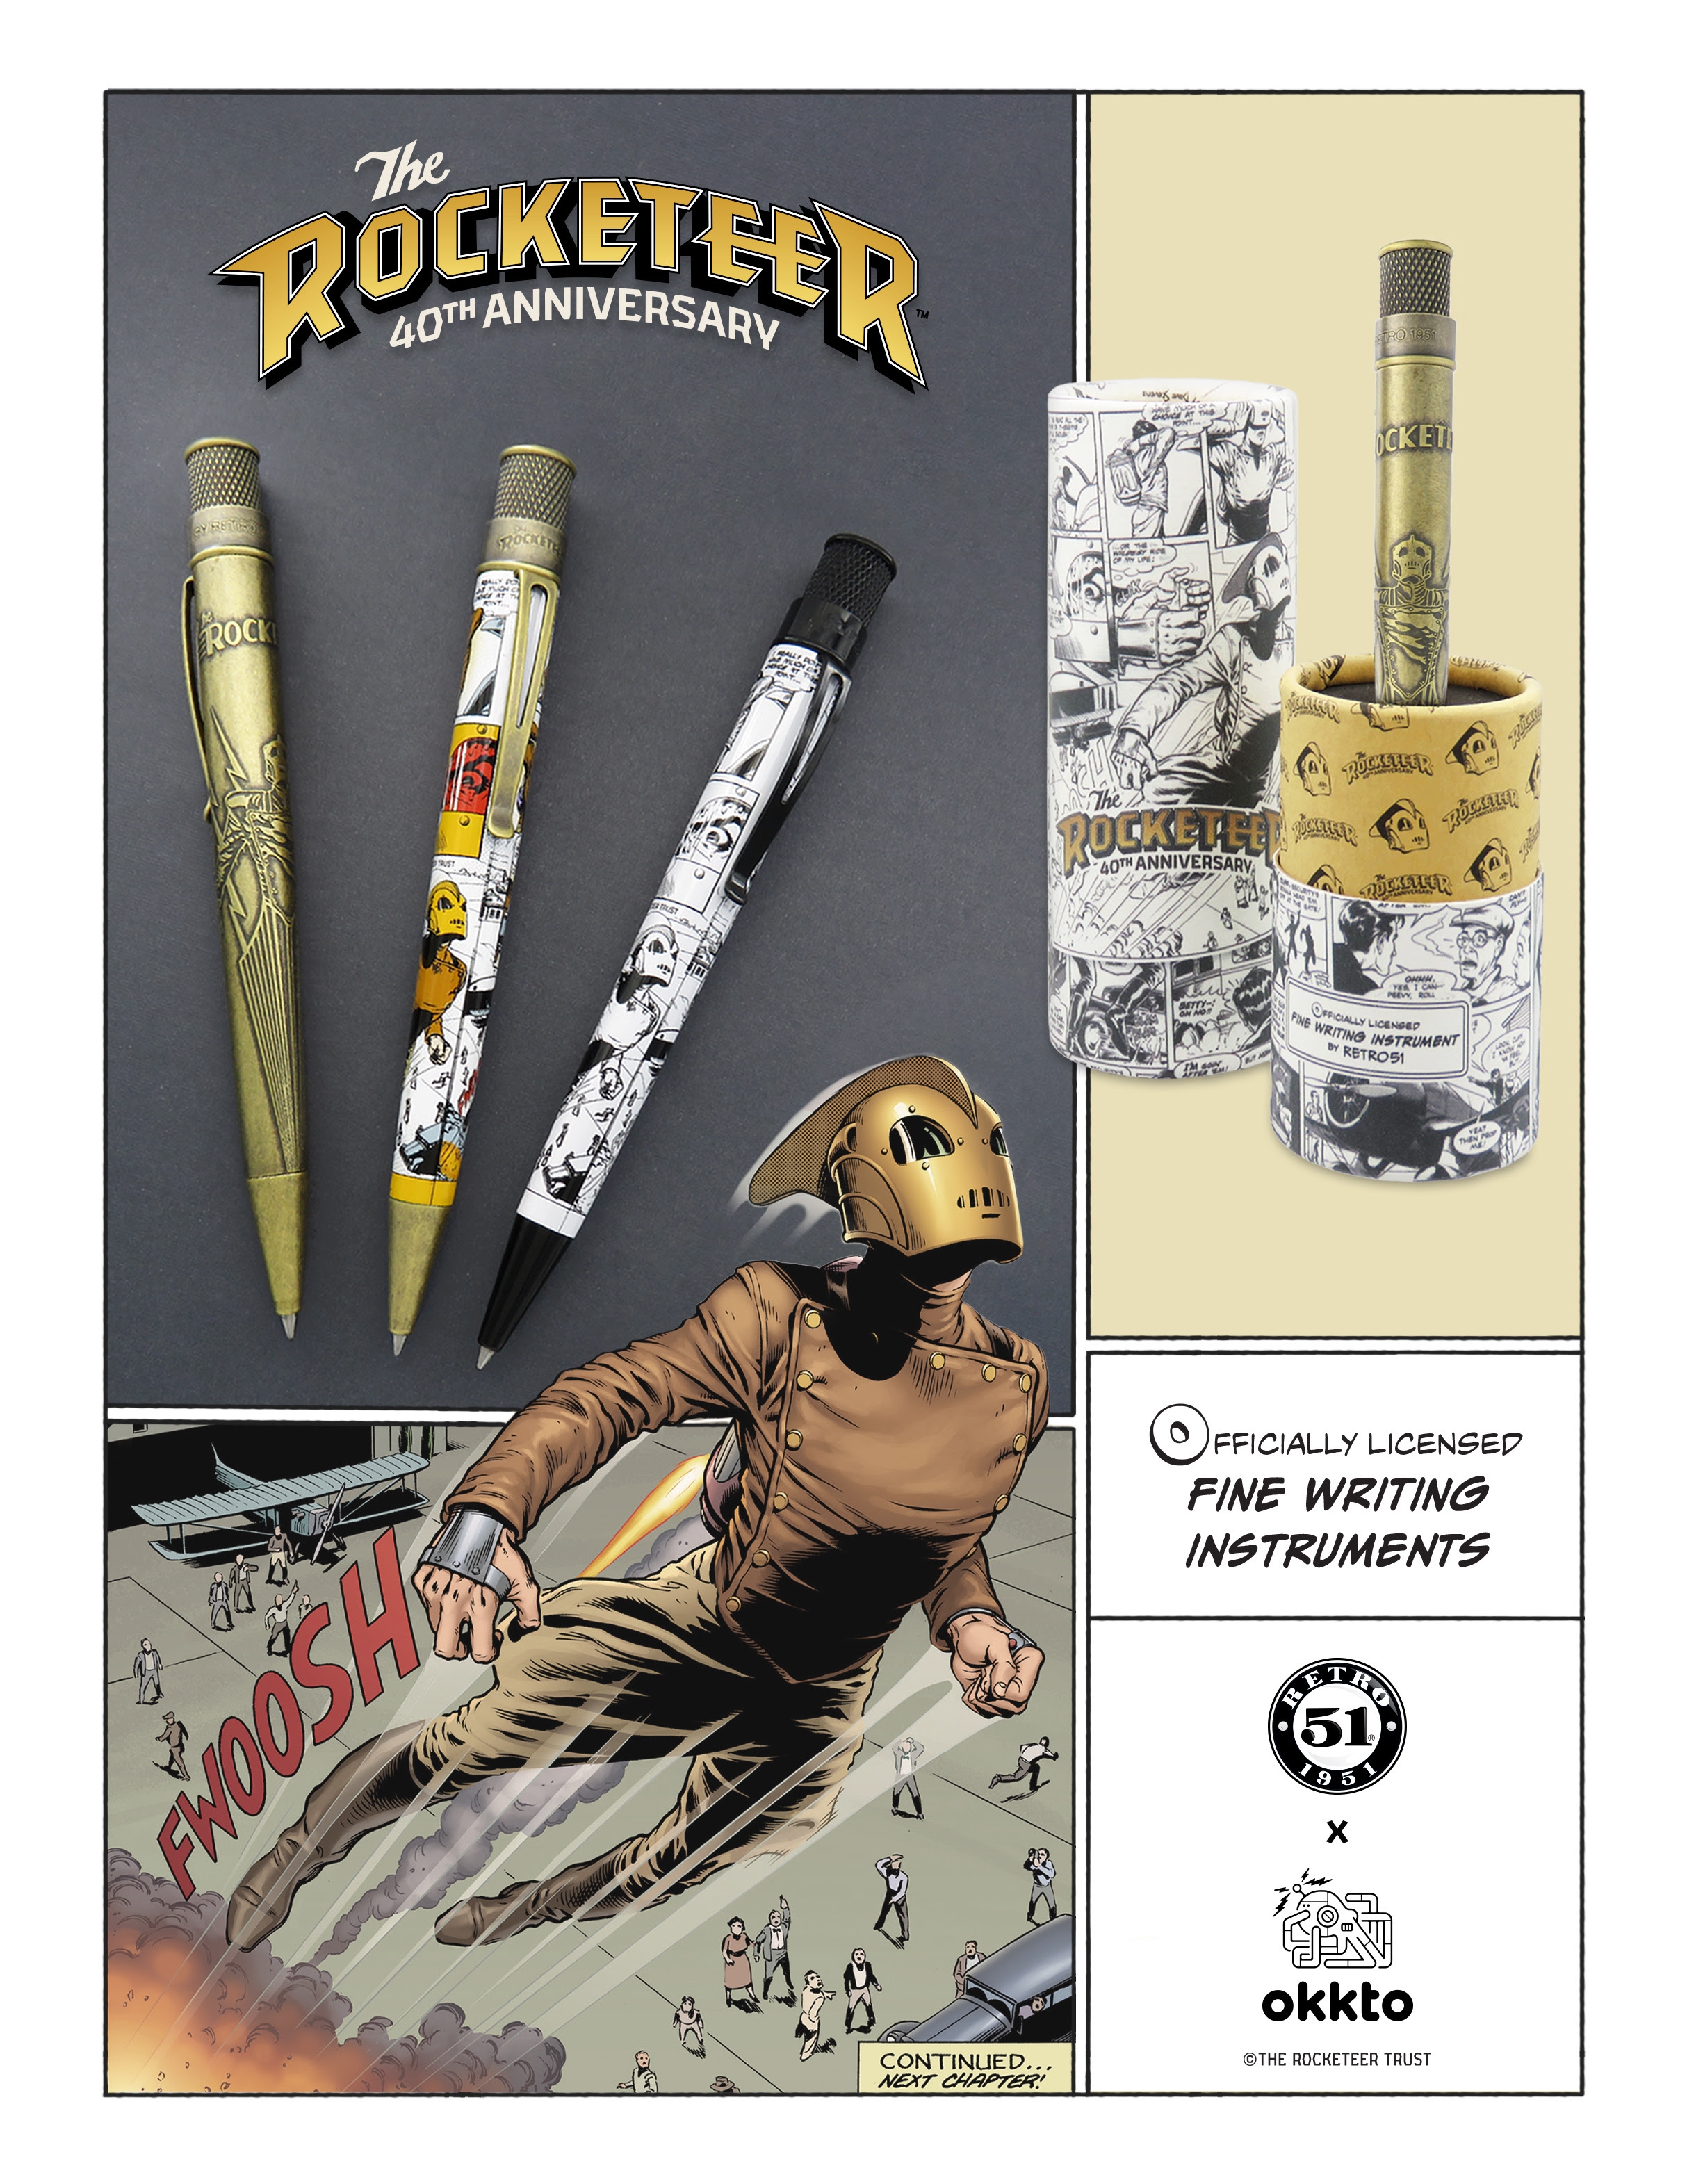 The Rocketeer! Collection